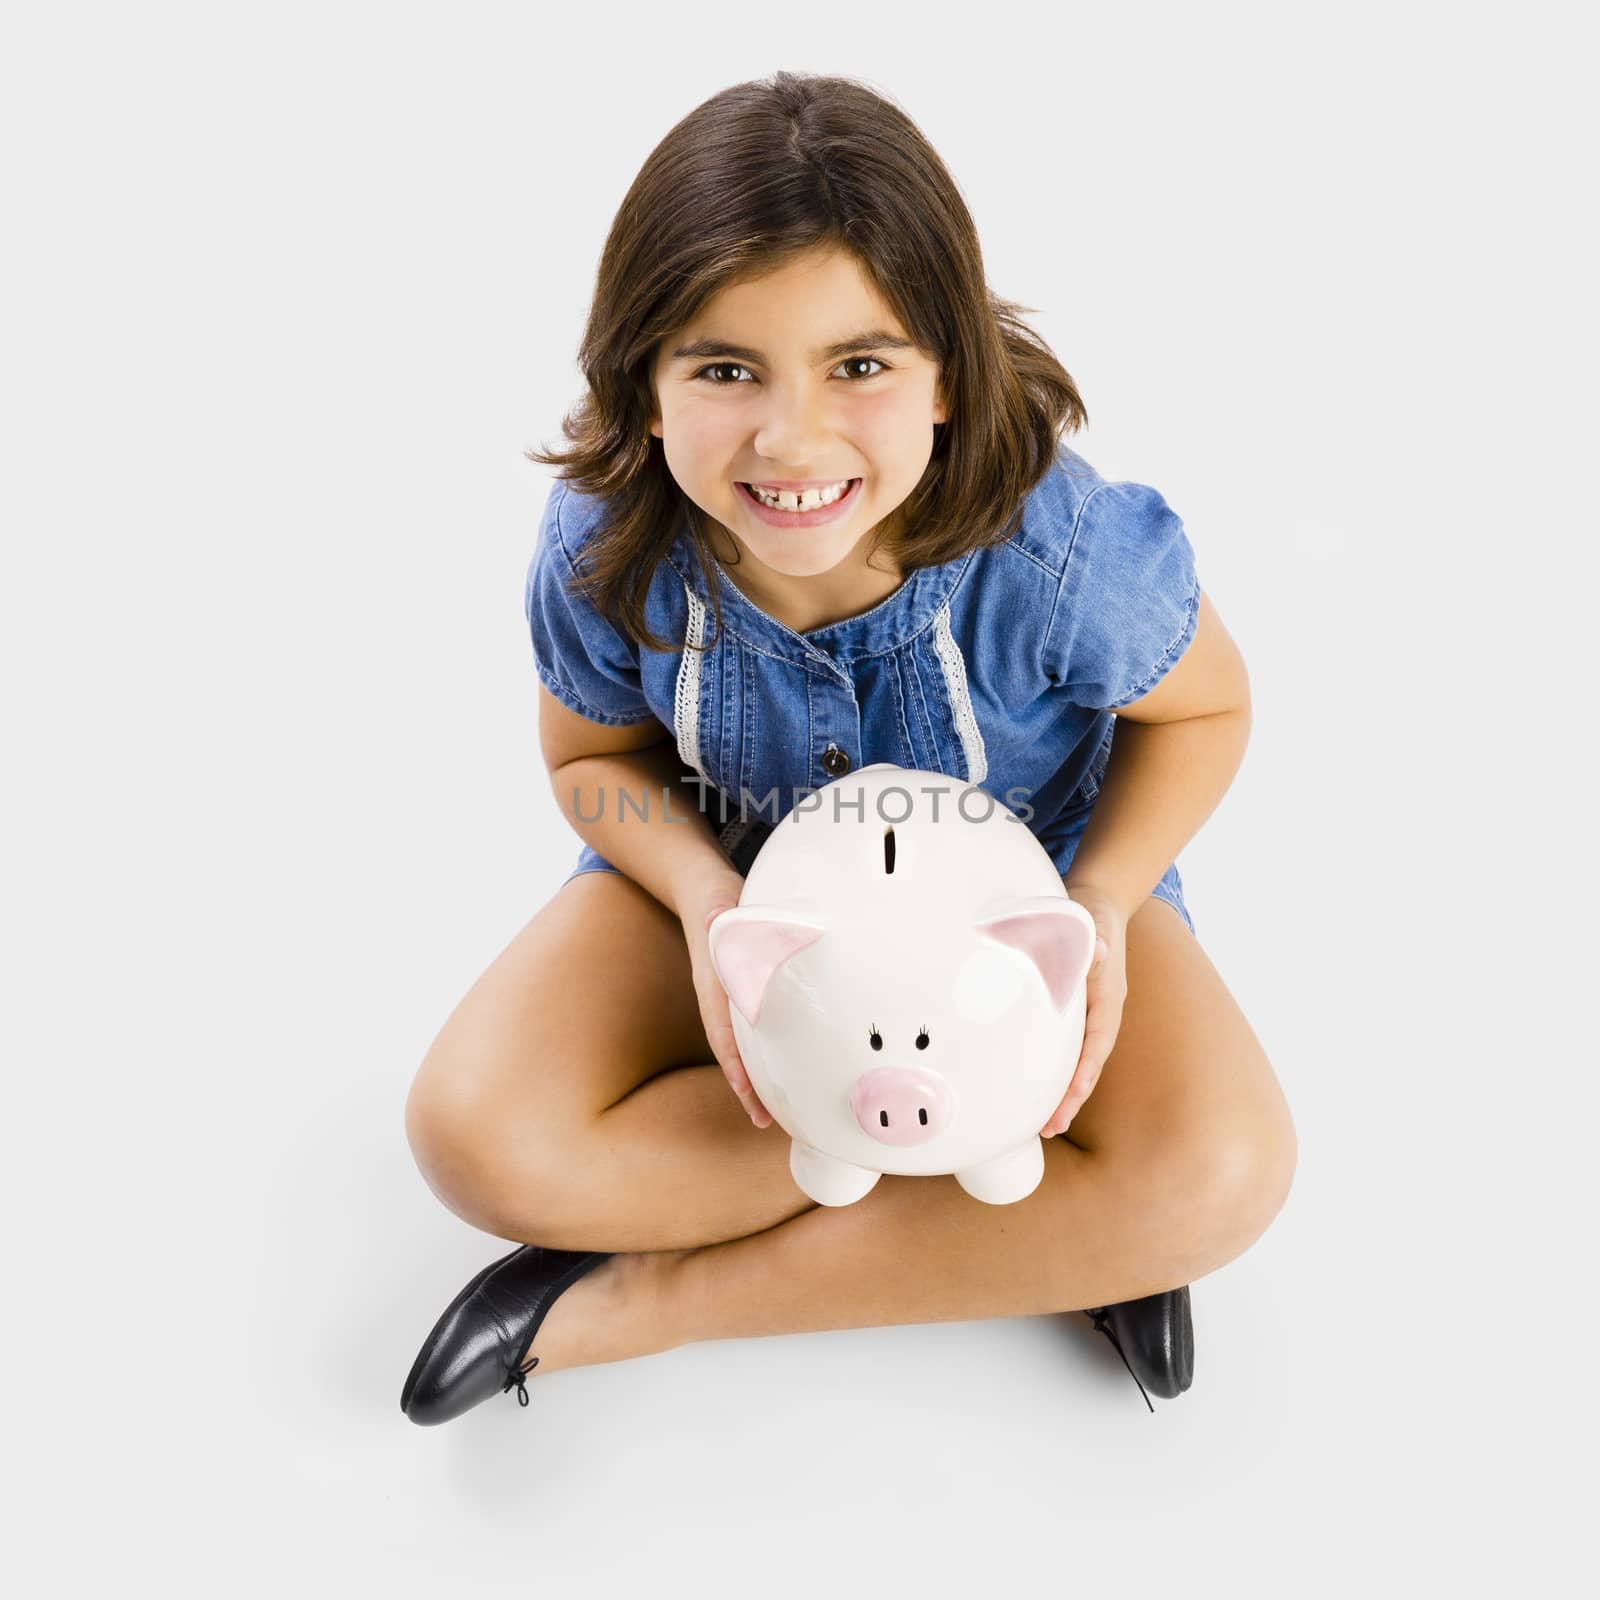 Young girl sitting on floor and holding a piggybank